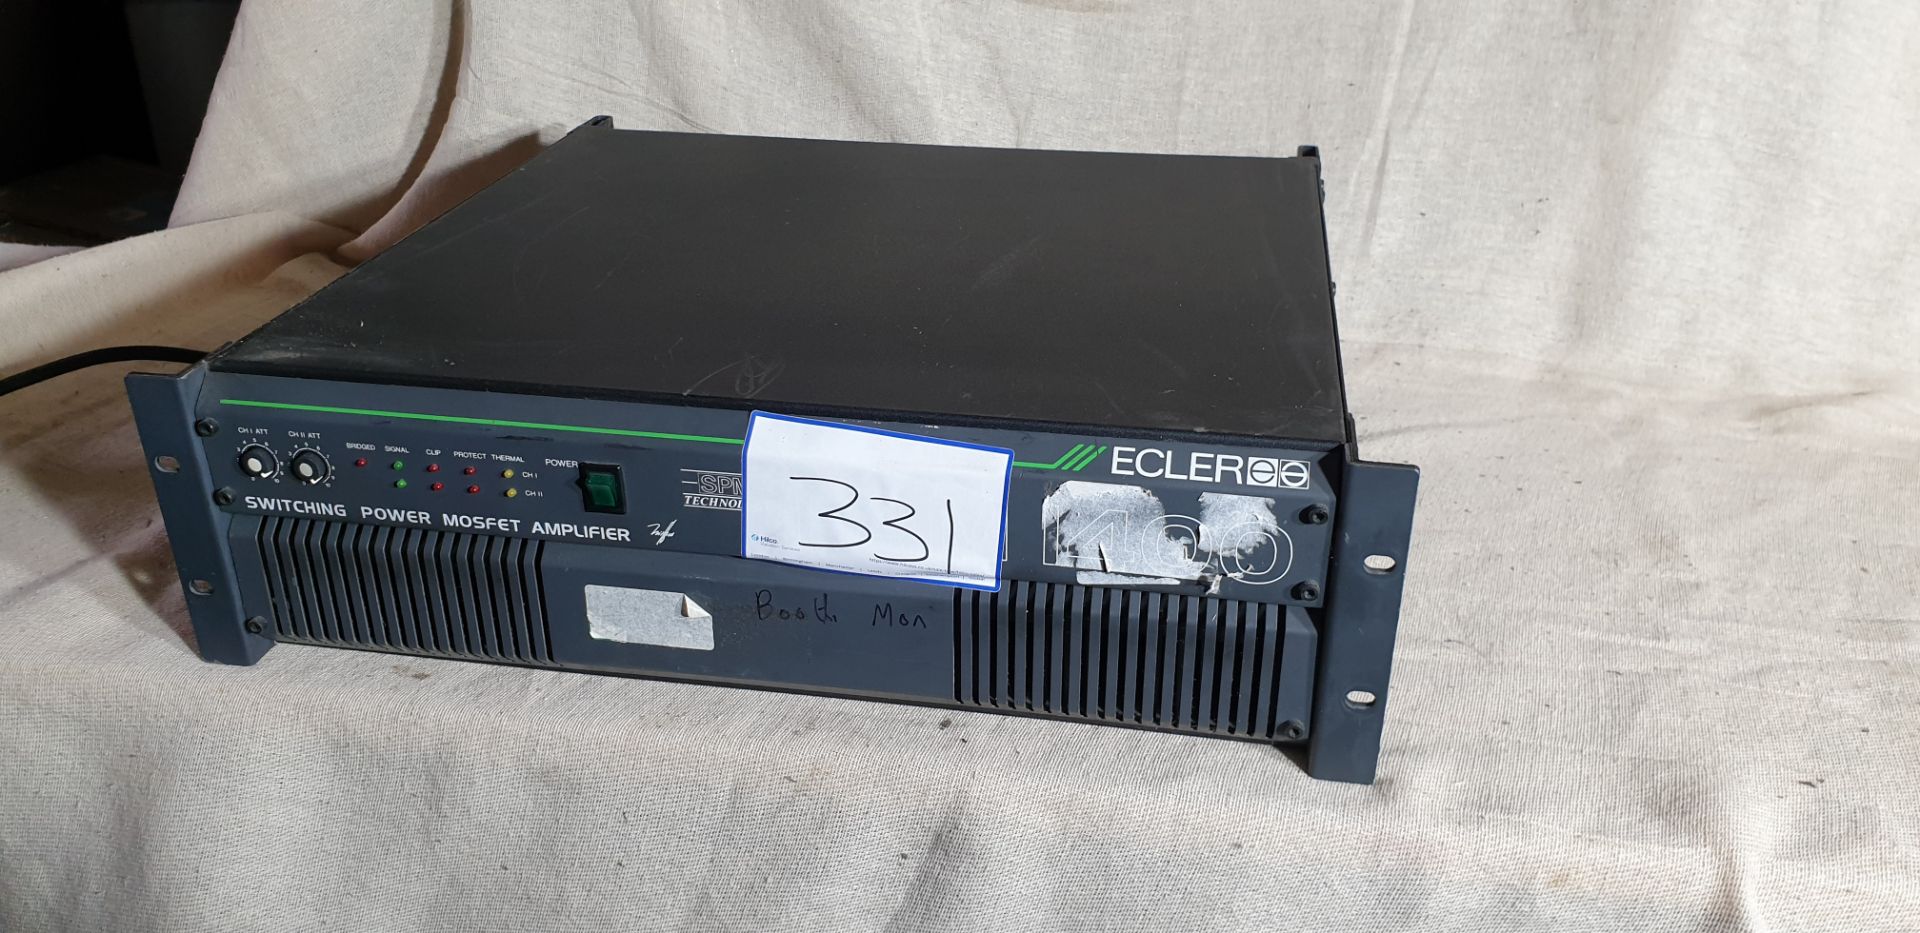 1 ; ECLER Pam 1400 Switching Power Mosfet Amplifier